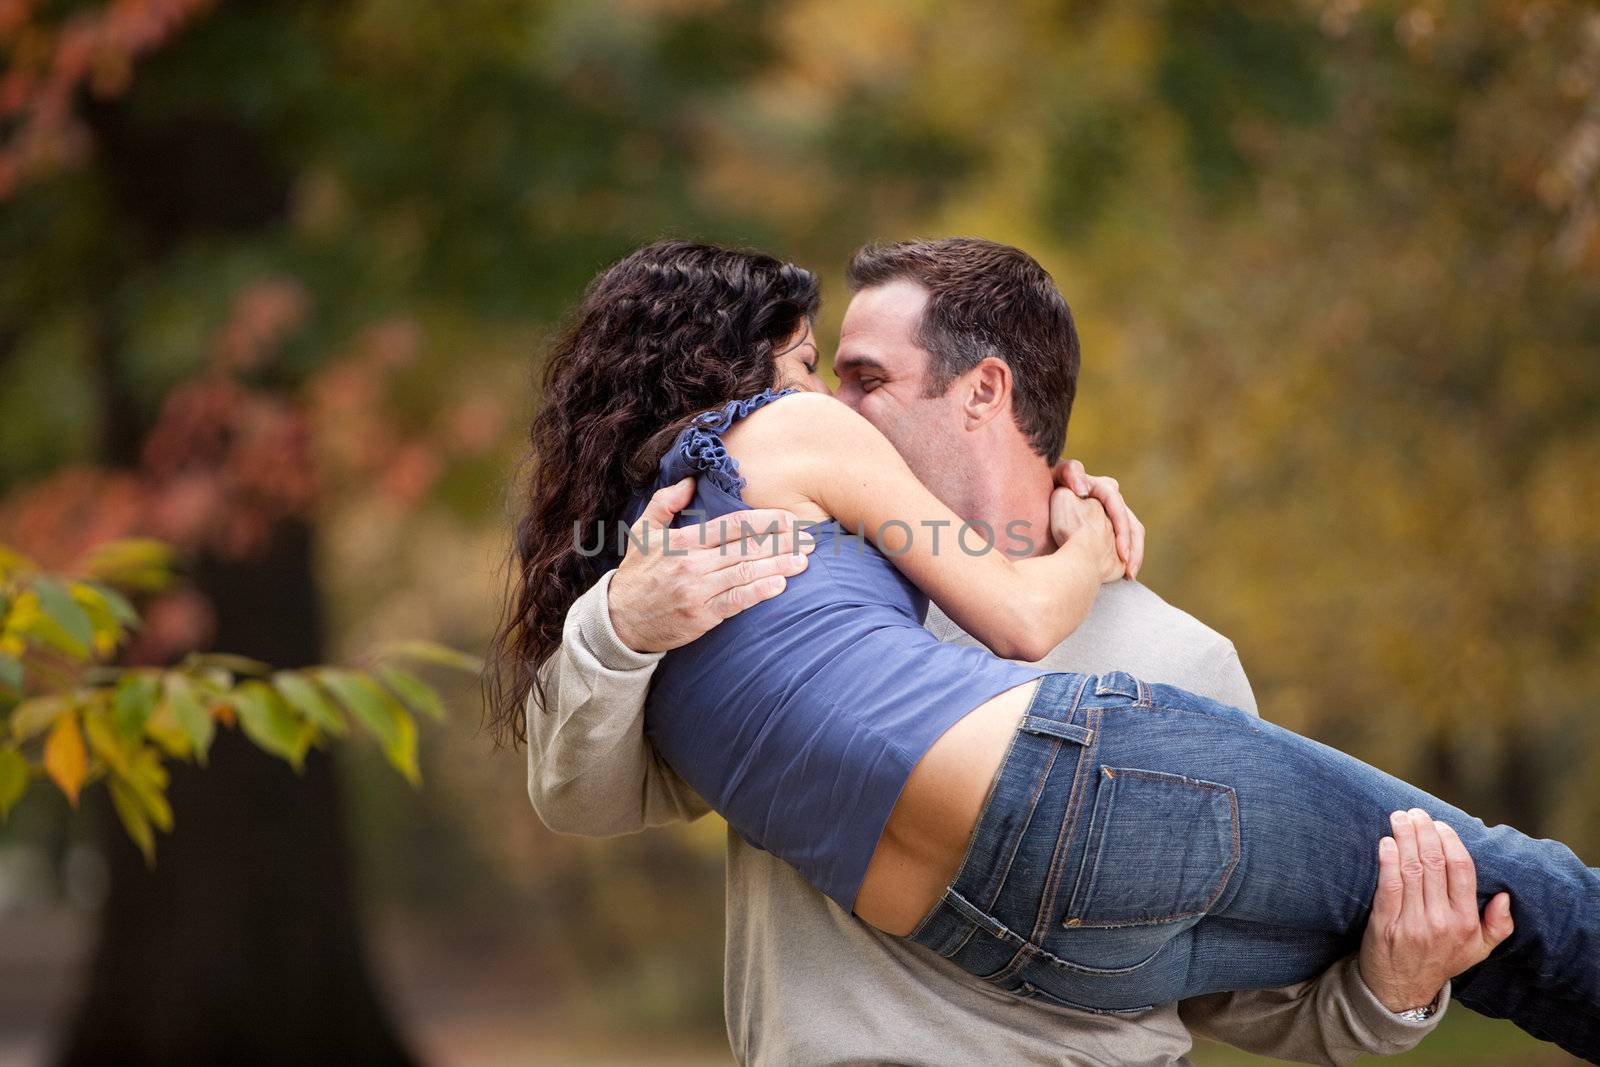 A playful couple - man holding woman in the park